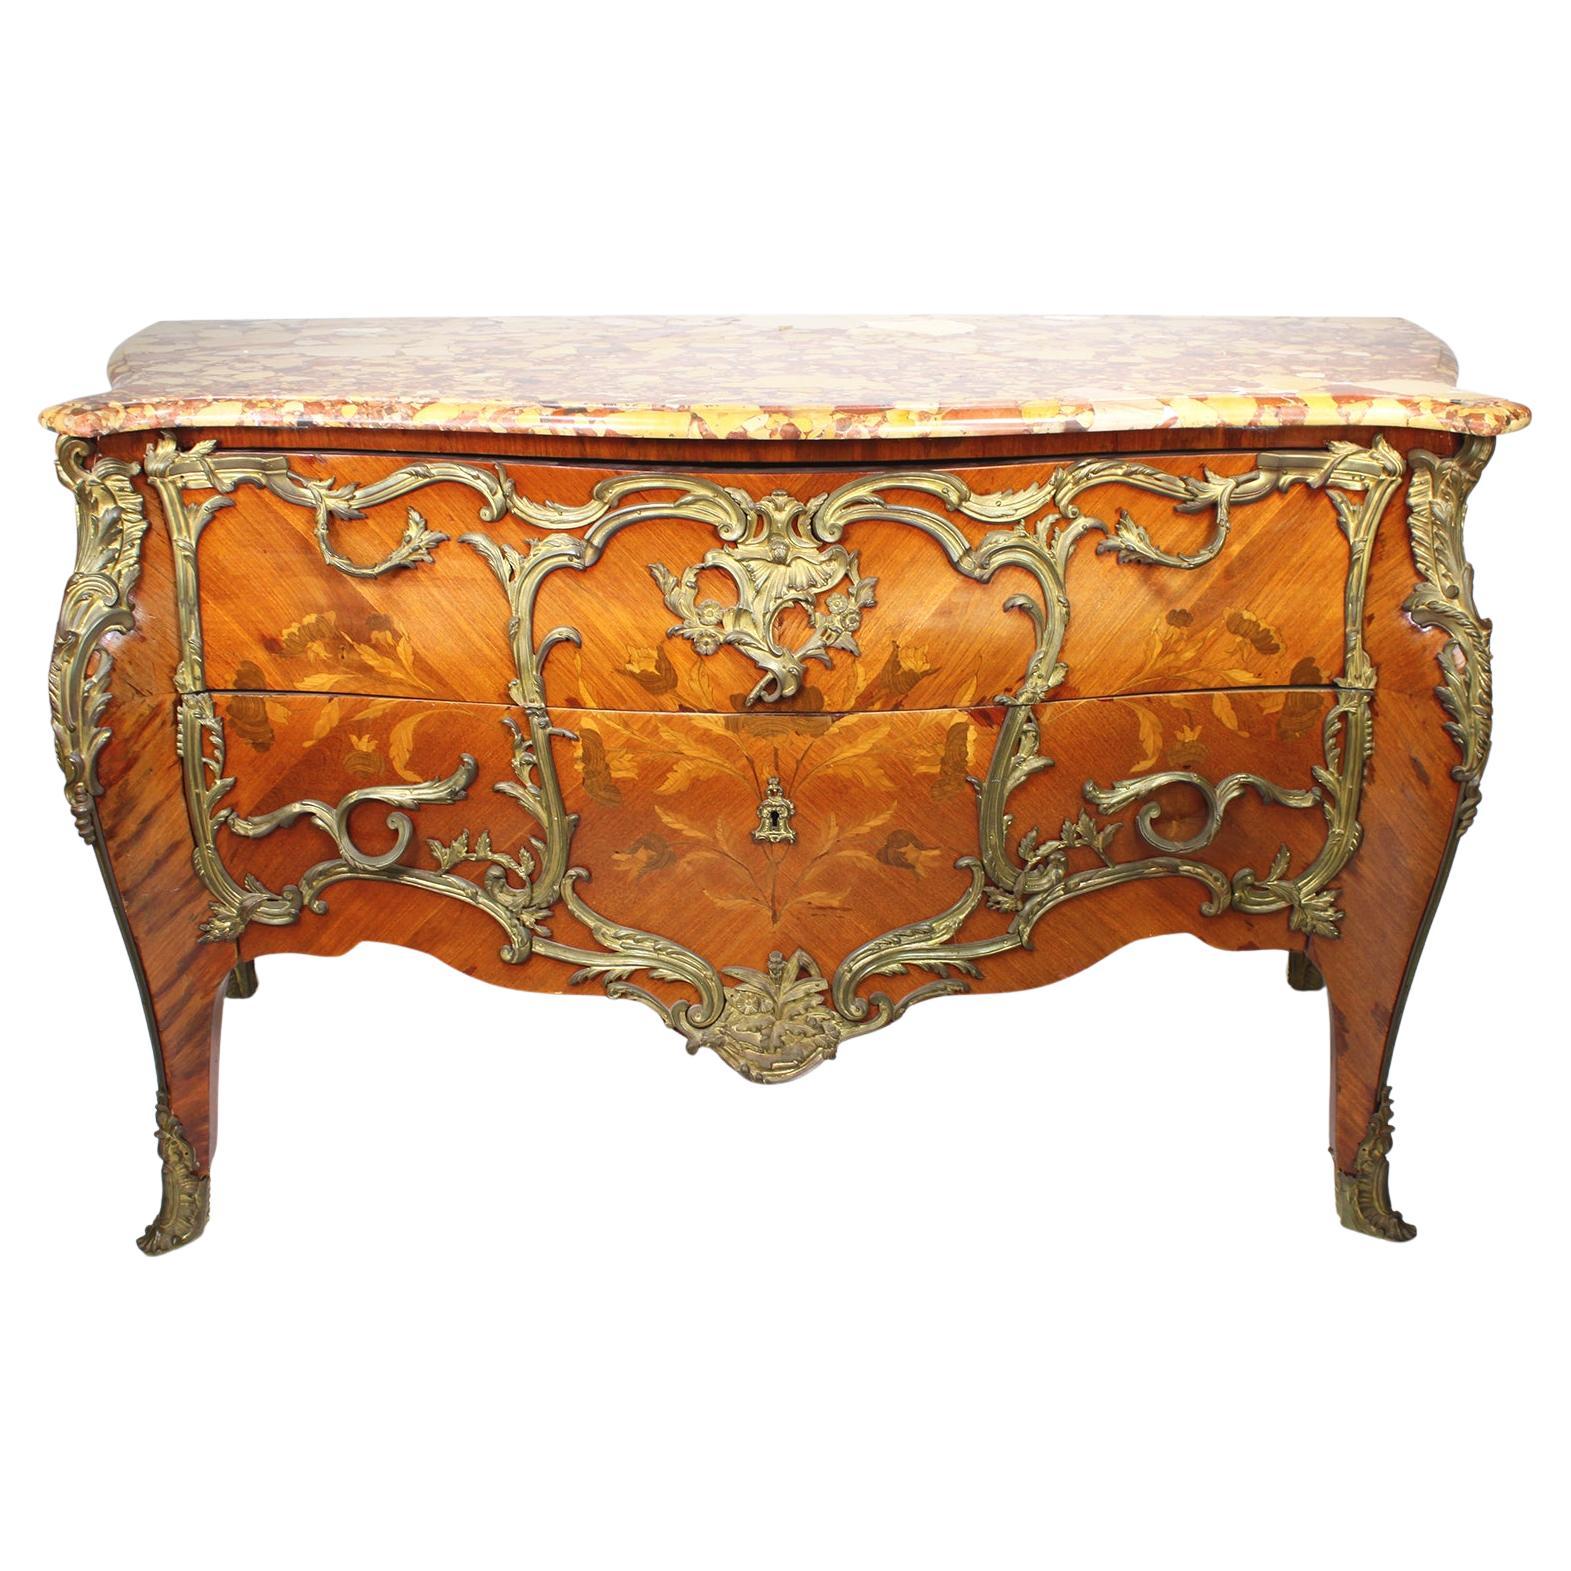 French 19th/20th Century Louis XV Style Gilt-Bronze Mounted Commode Marble Top For Sale